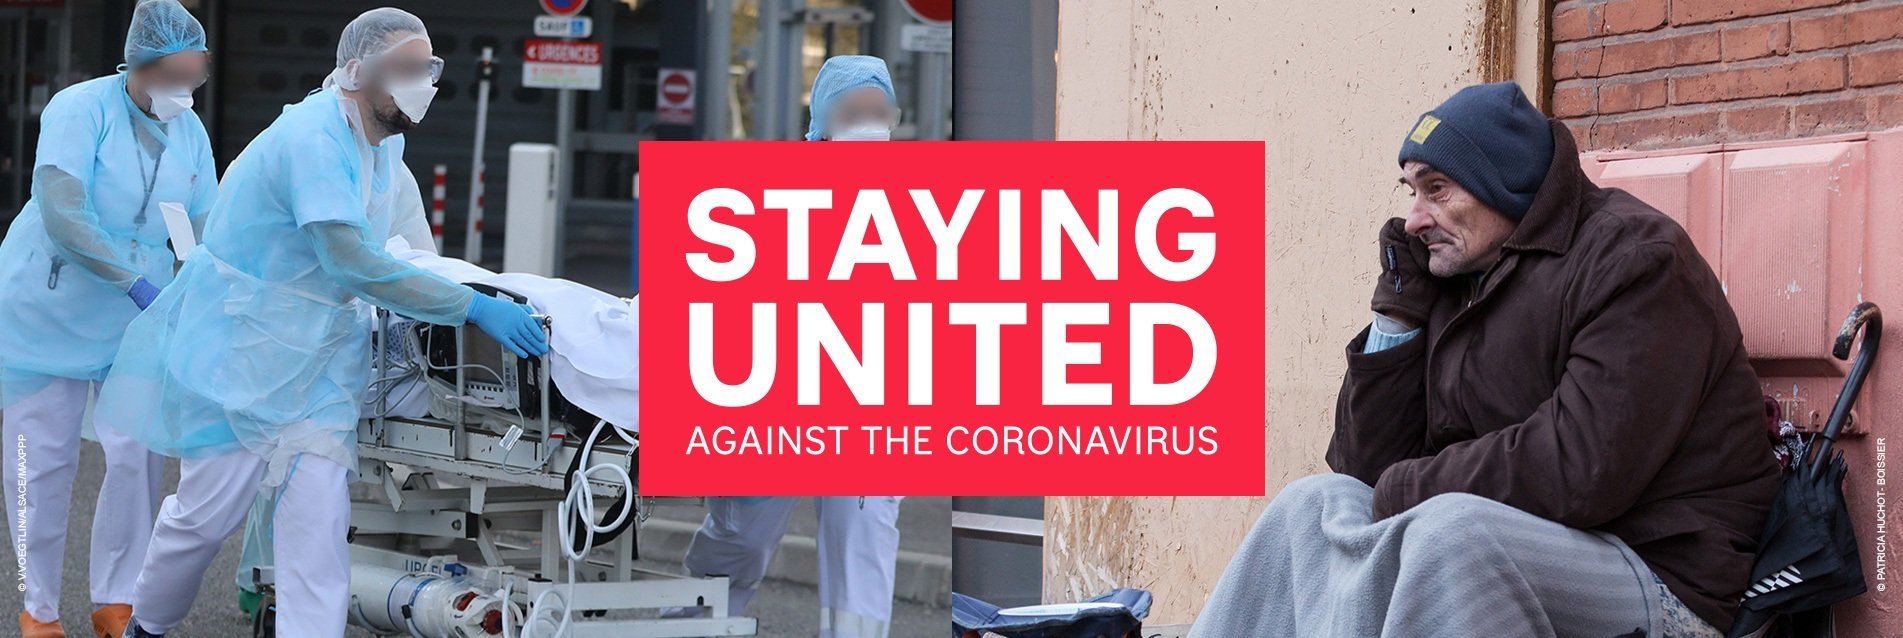 Staying United Against the Coronavirus: Fondation de France calls for donations